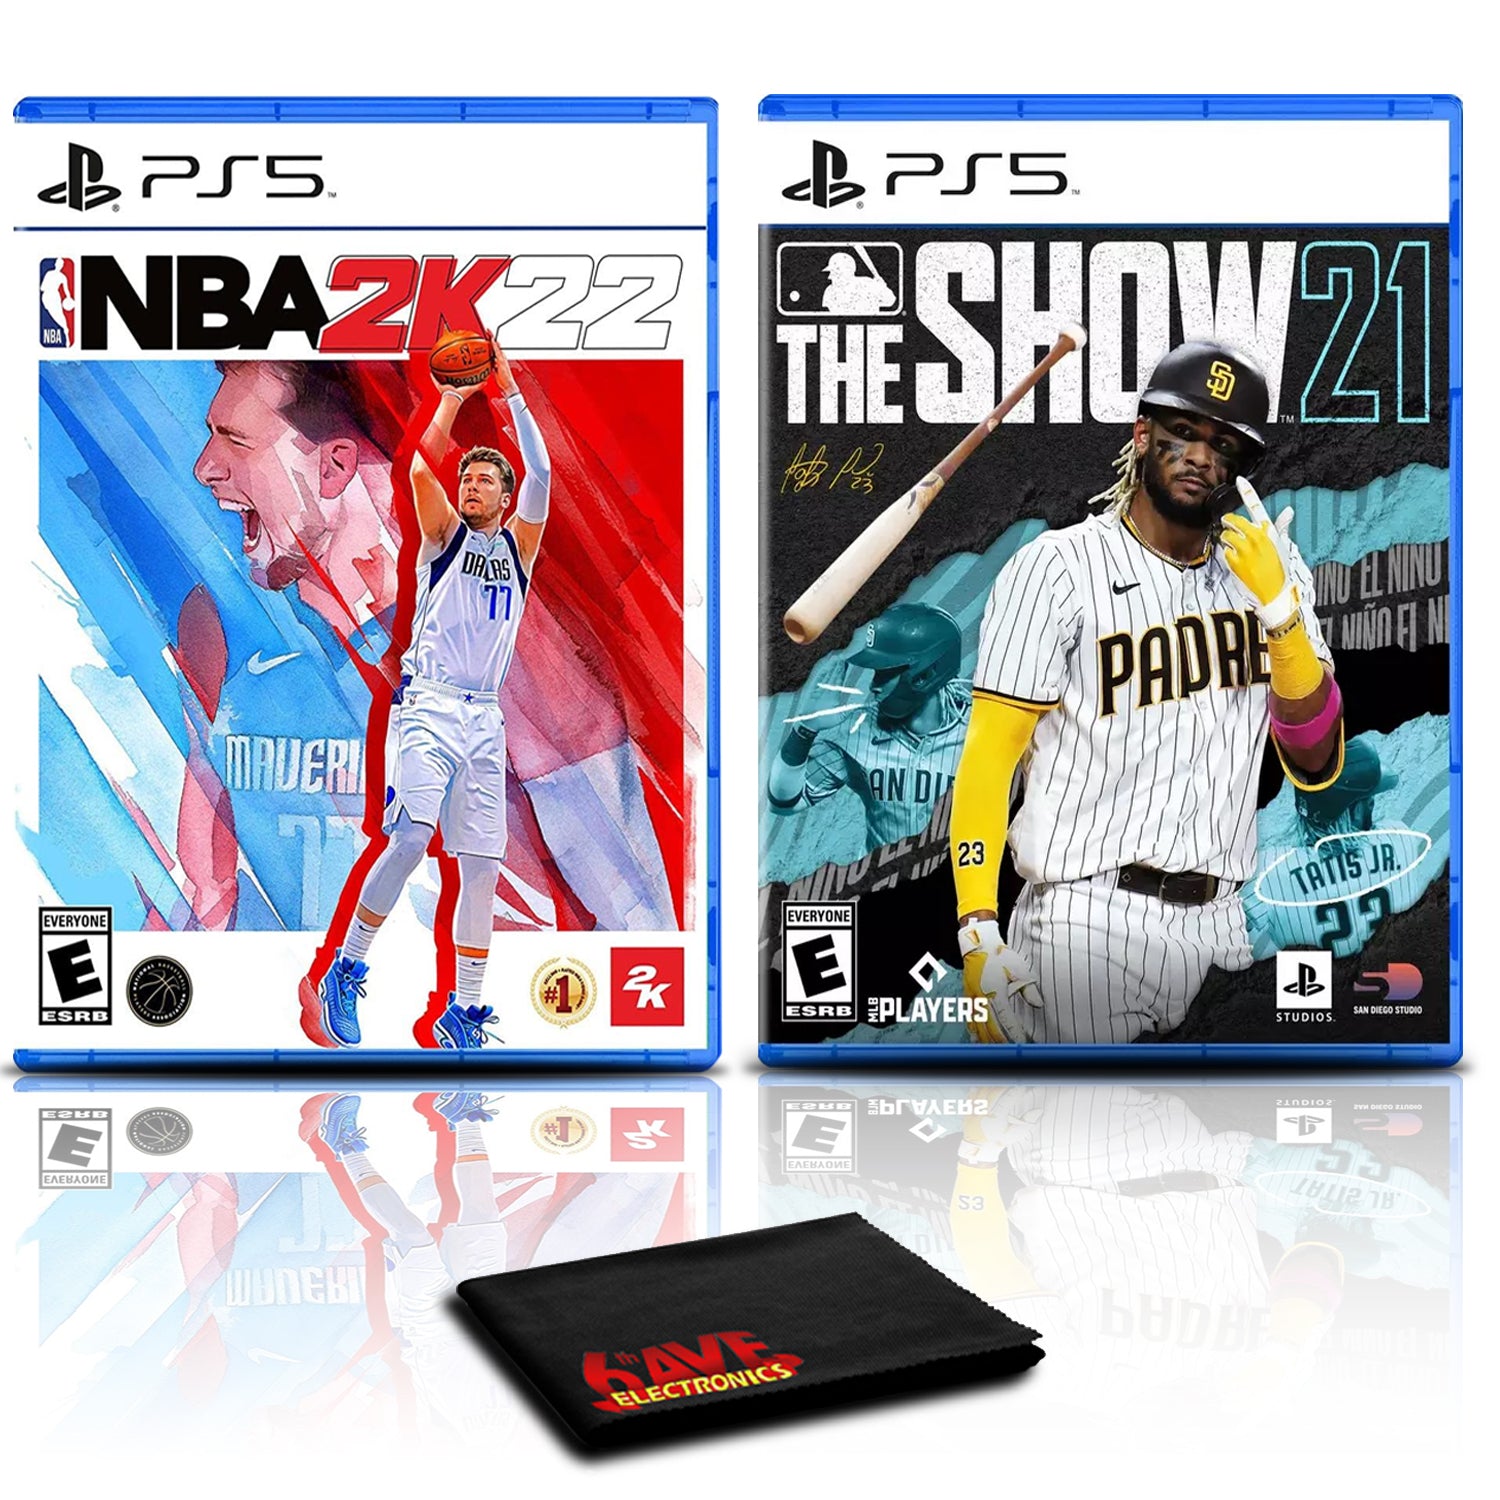 NBA 2K22 and MLB The Show 21 - Two Games for PlayStation 5